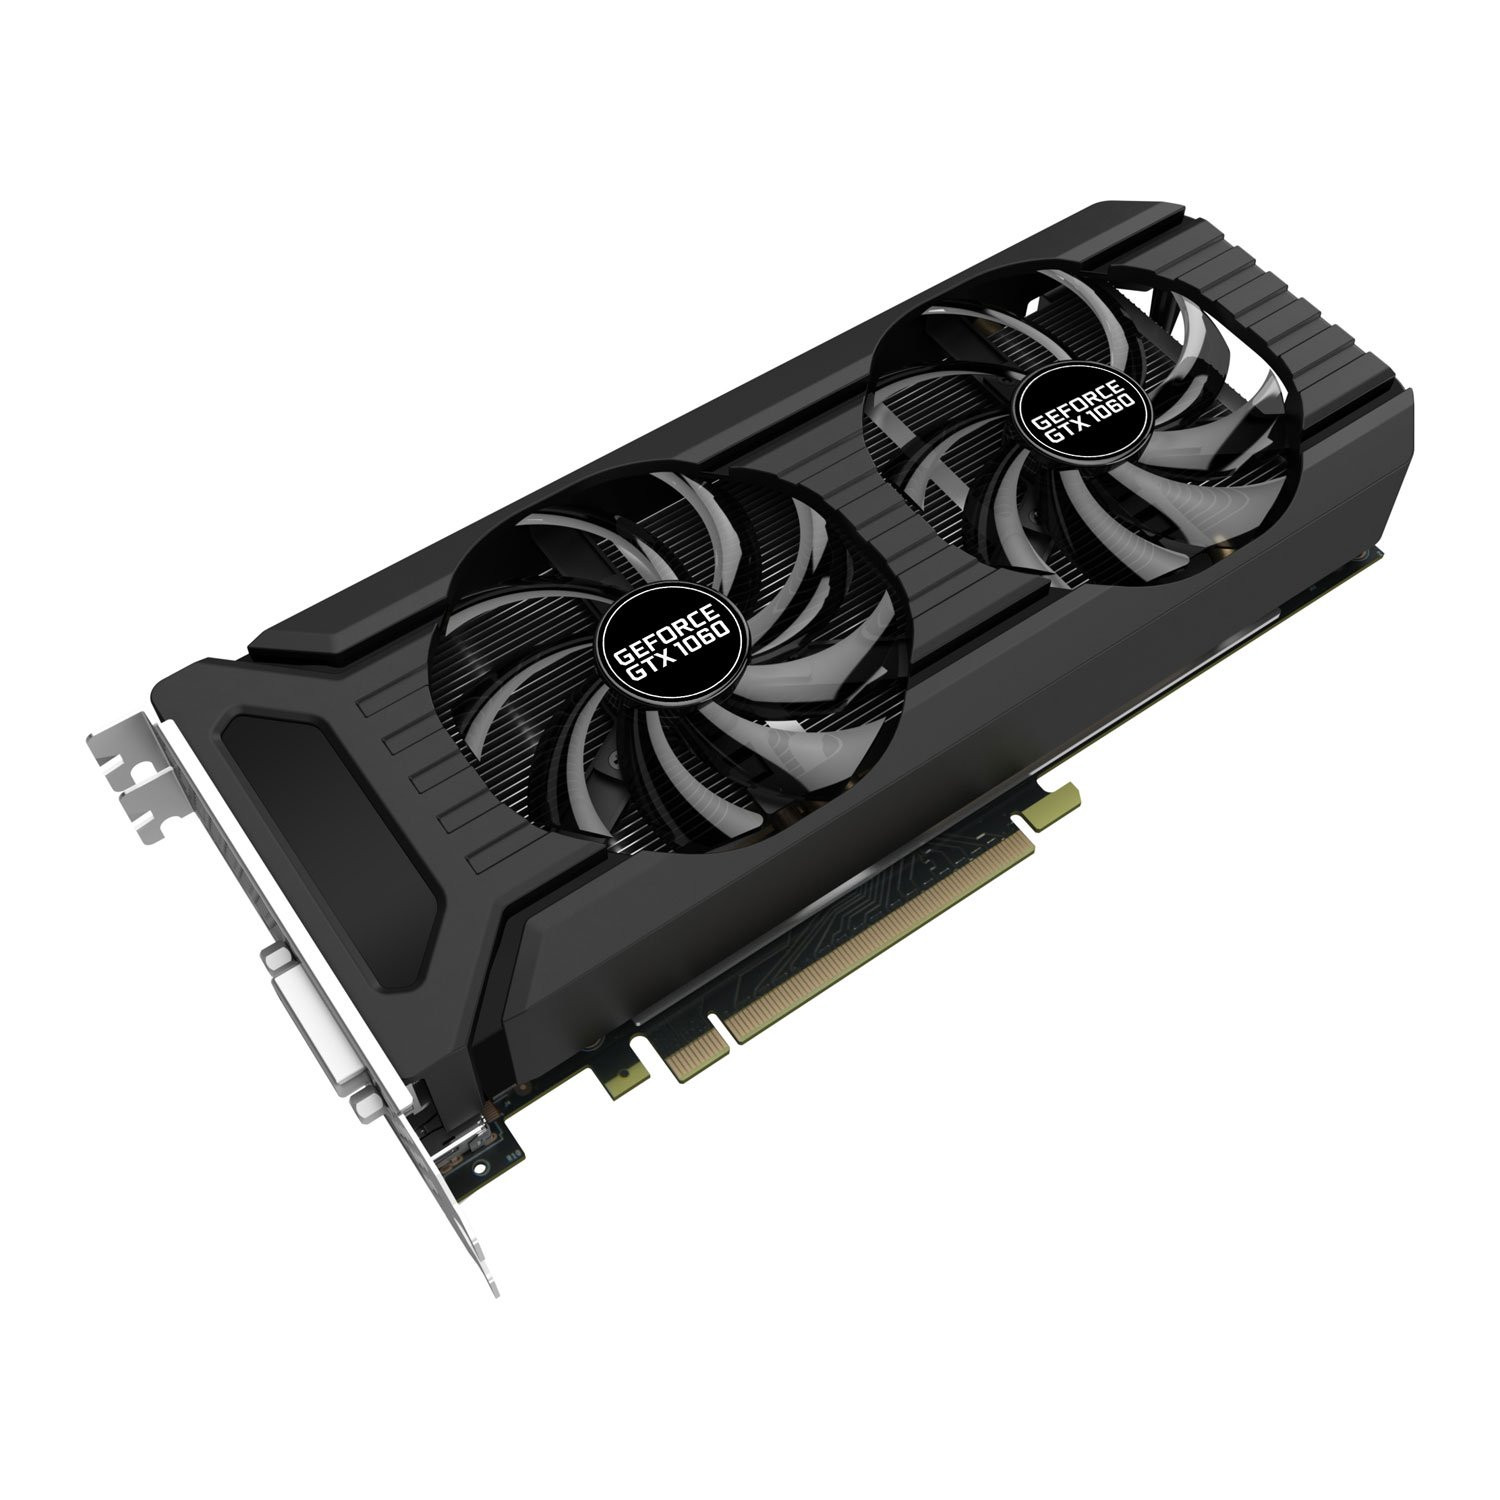 Palit GeForce GTX 1060 6GB Dual Graphics Card - VR Ready | Falcon Computers